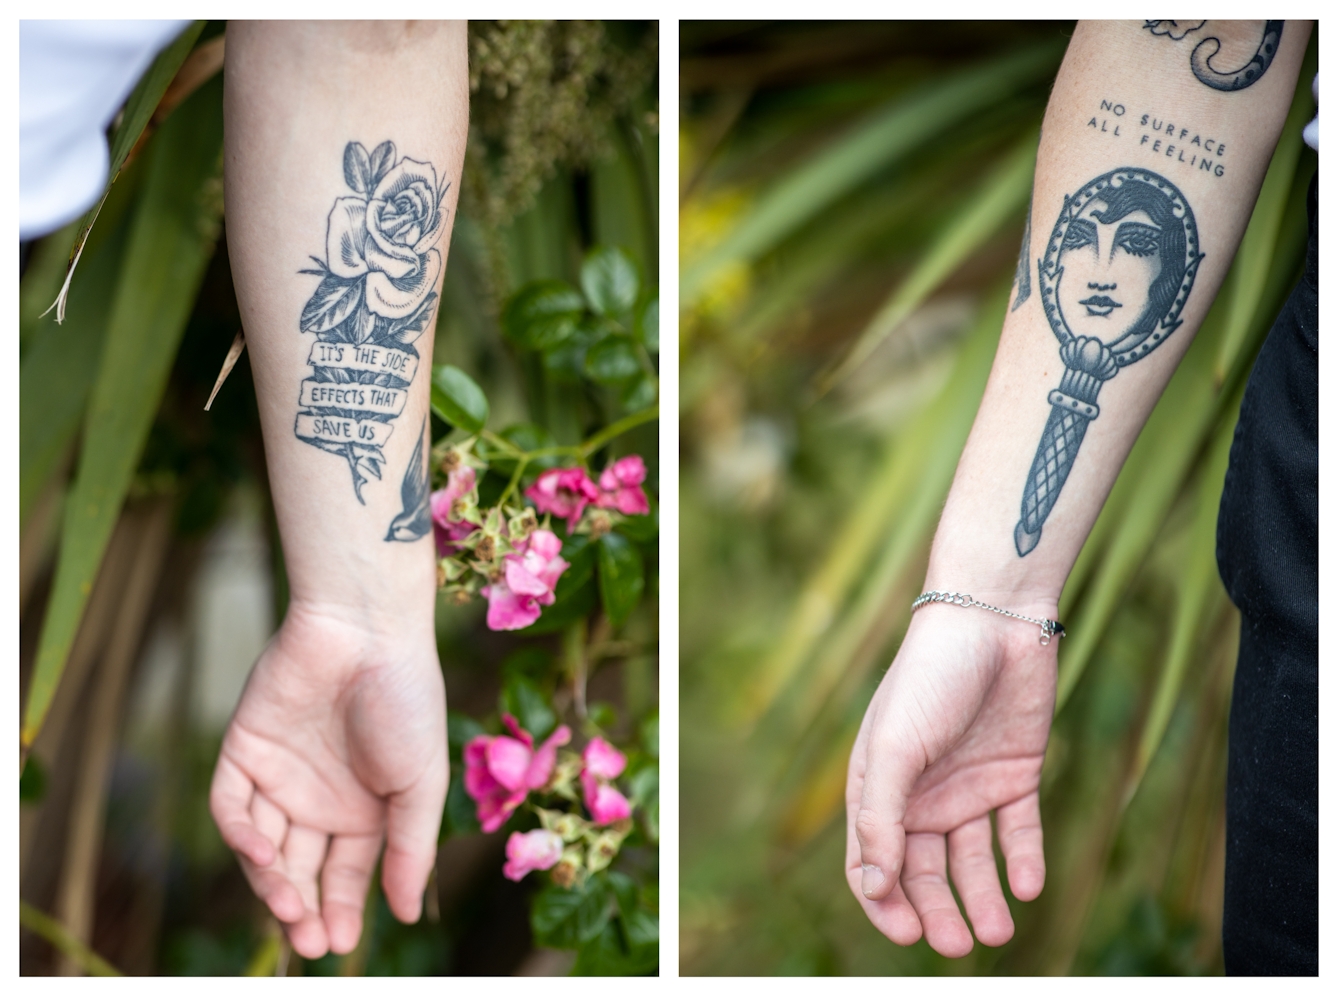 Photographic diptych. Both images show a close-up view of a man's tattooed lower arms. He is standing in a garden scene, surrounded by green pants and pink flowers. The image on the left shows his left arm which is adorned with a tattoo of a rose and the words, "It's the side effects that save us". The image on the right shows his right arm which is adorned with a tattoo of a face inside an ornate hand mirror. Above the mirror are the words "No Surface, all feeling".